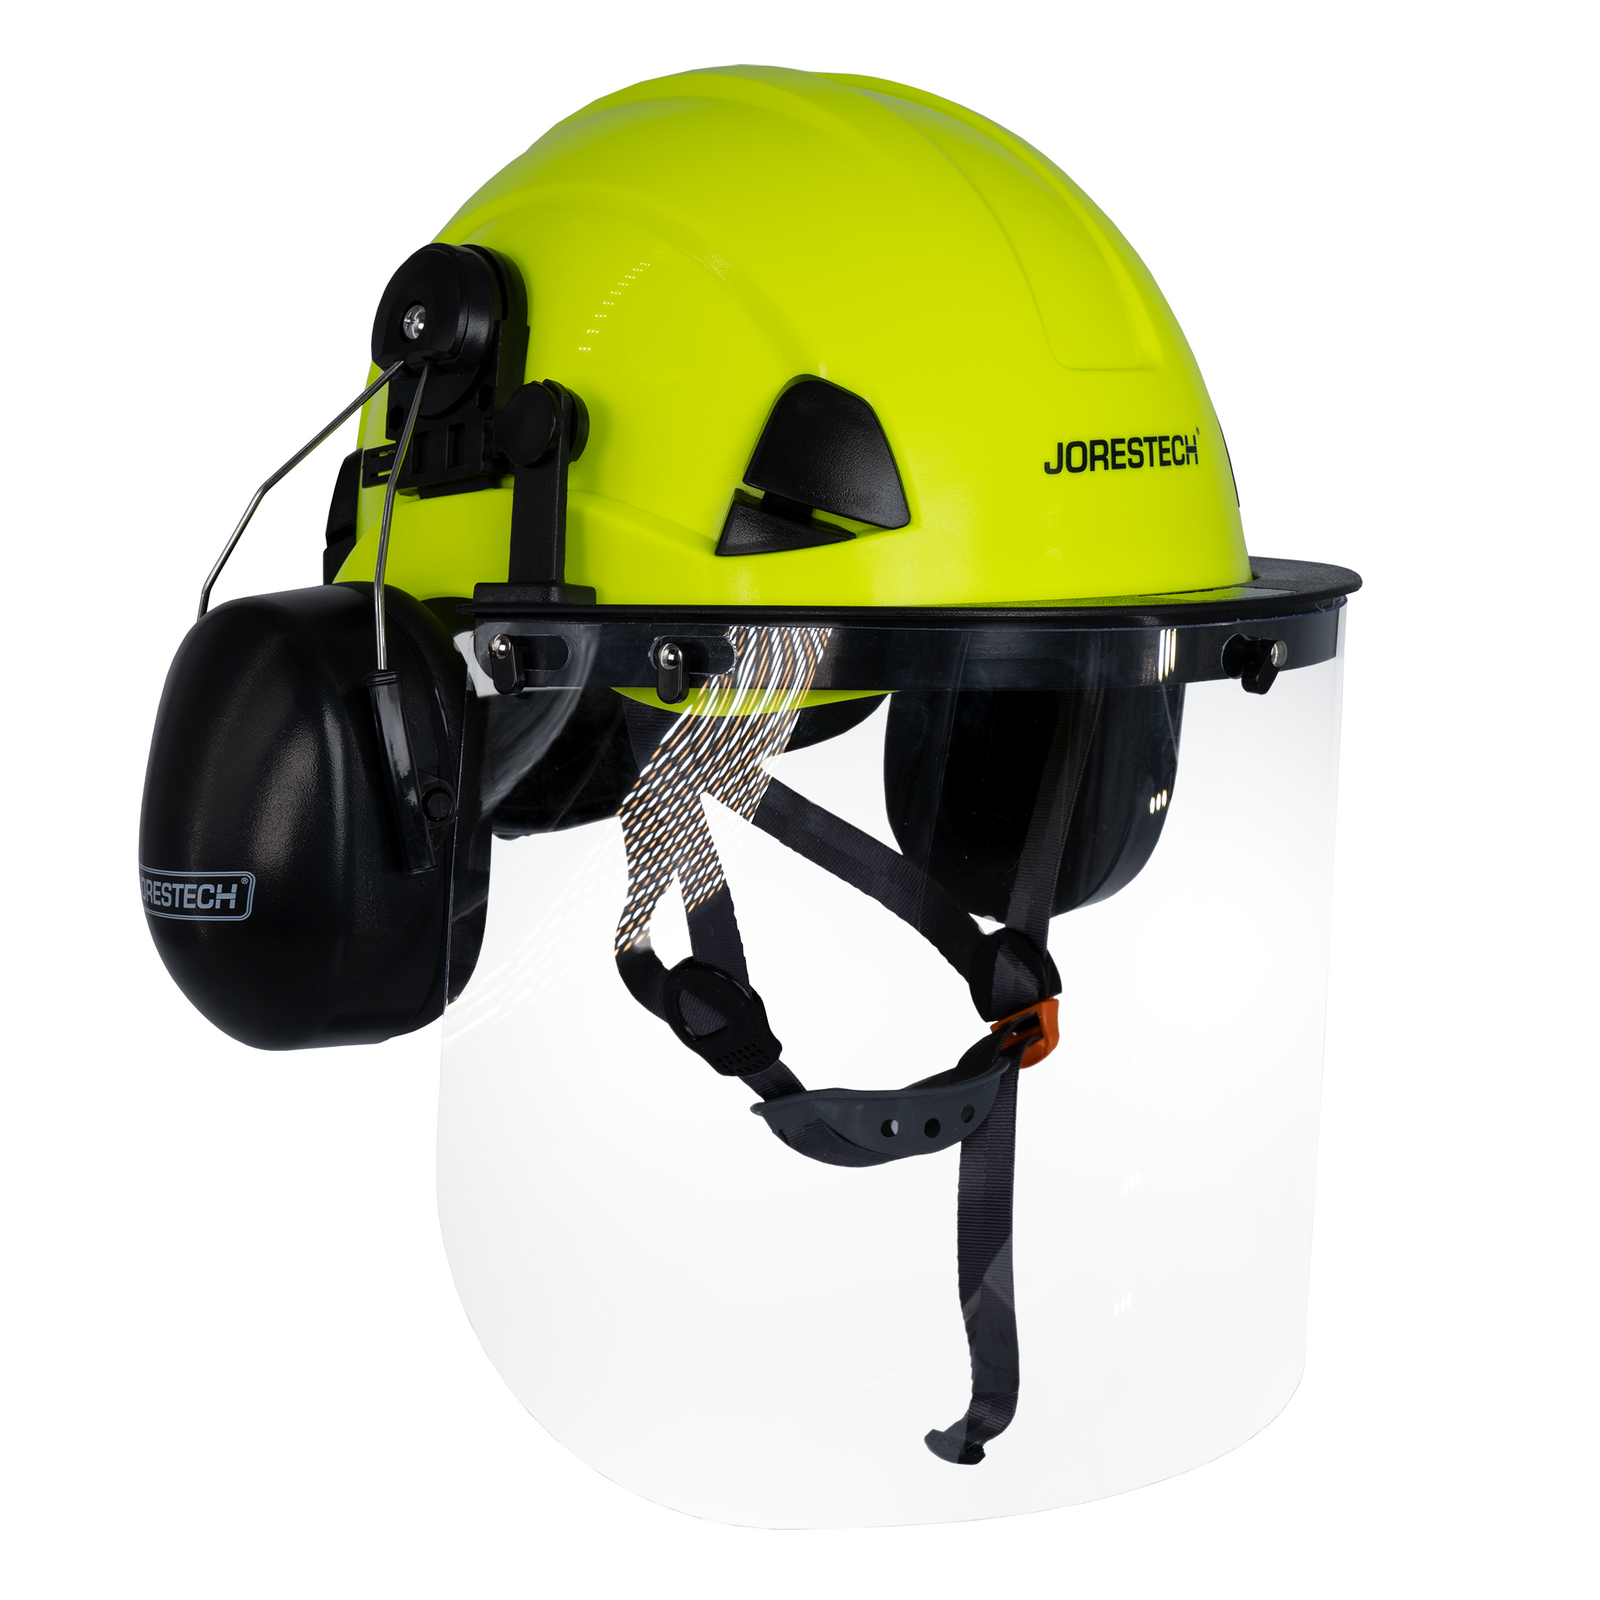 Side view of the Jorestech lime 3-in-1 helmet system with mountable face shield and earmuffs